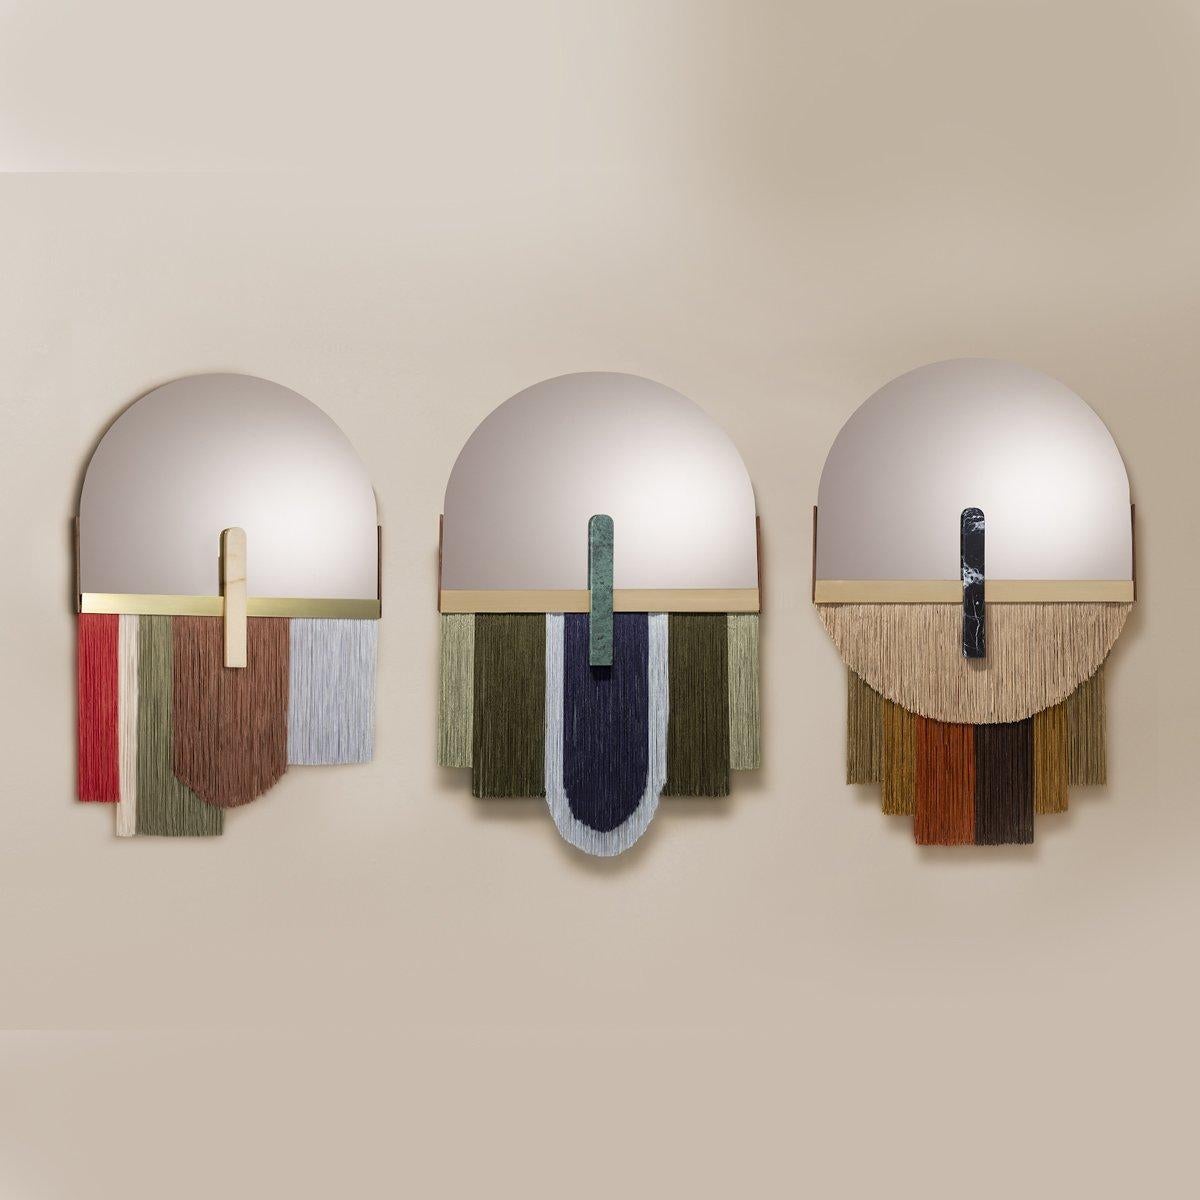 Ensemble of Three Colorful Wall Mirrors by Dooq In New Condition For Sale In Geneve, CH